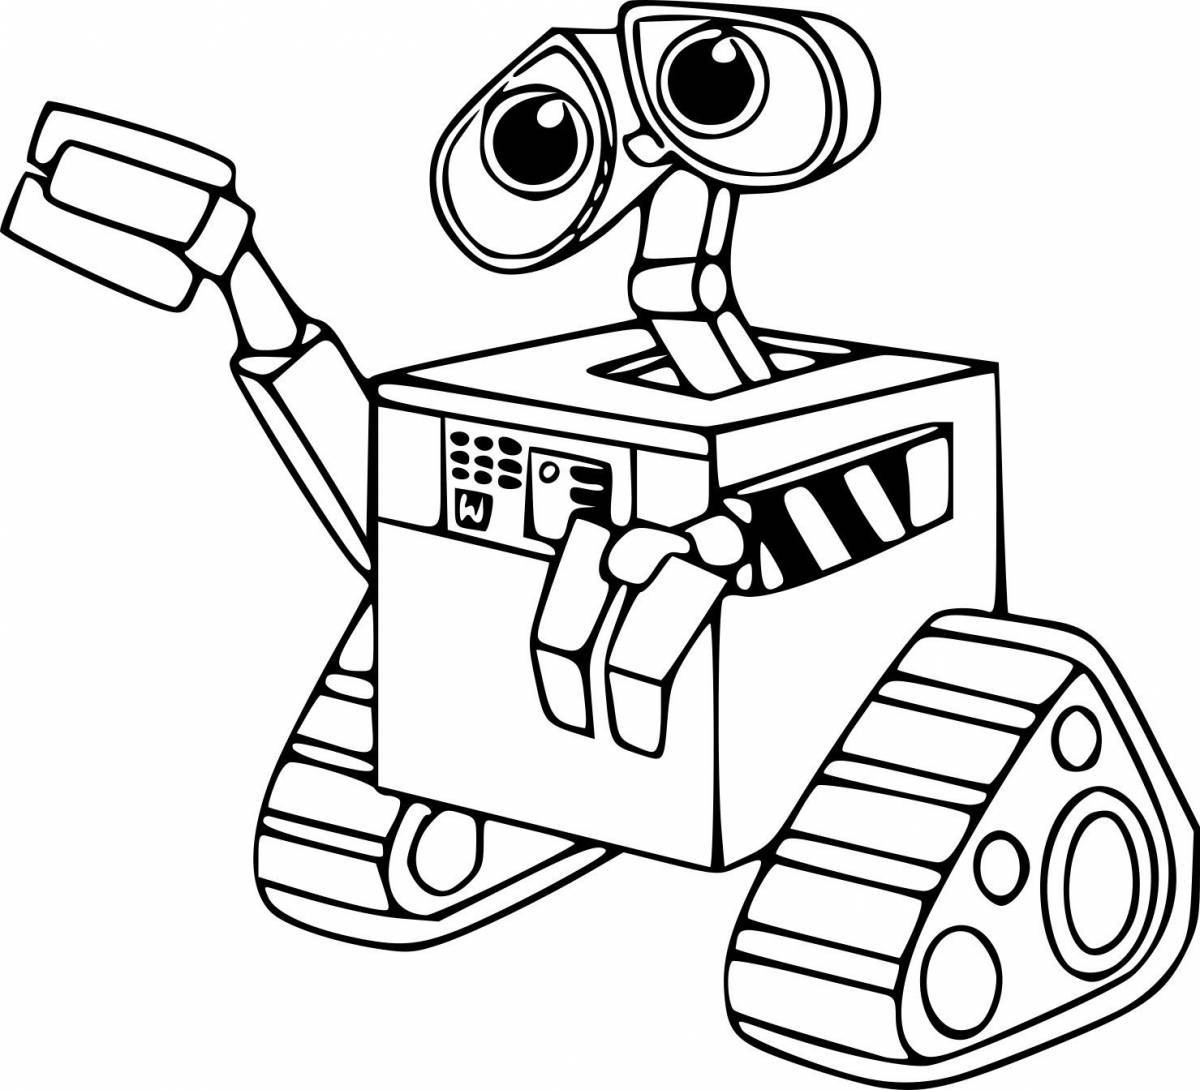 Coloring book brave robot